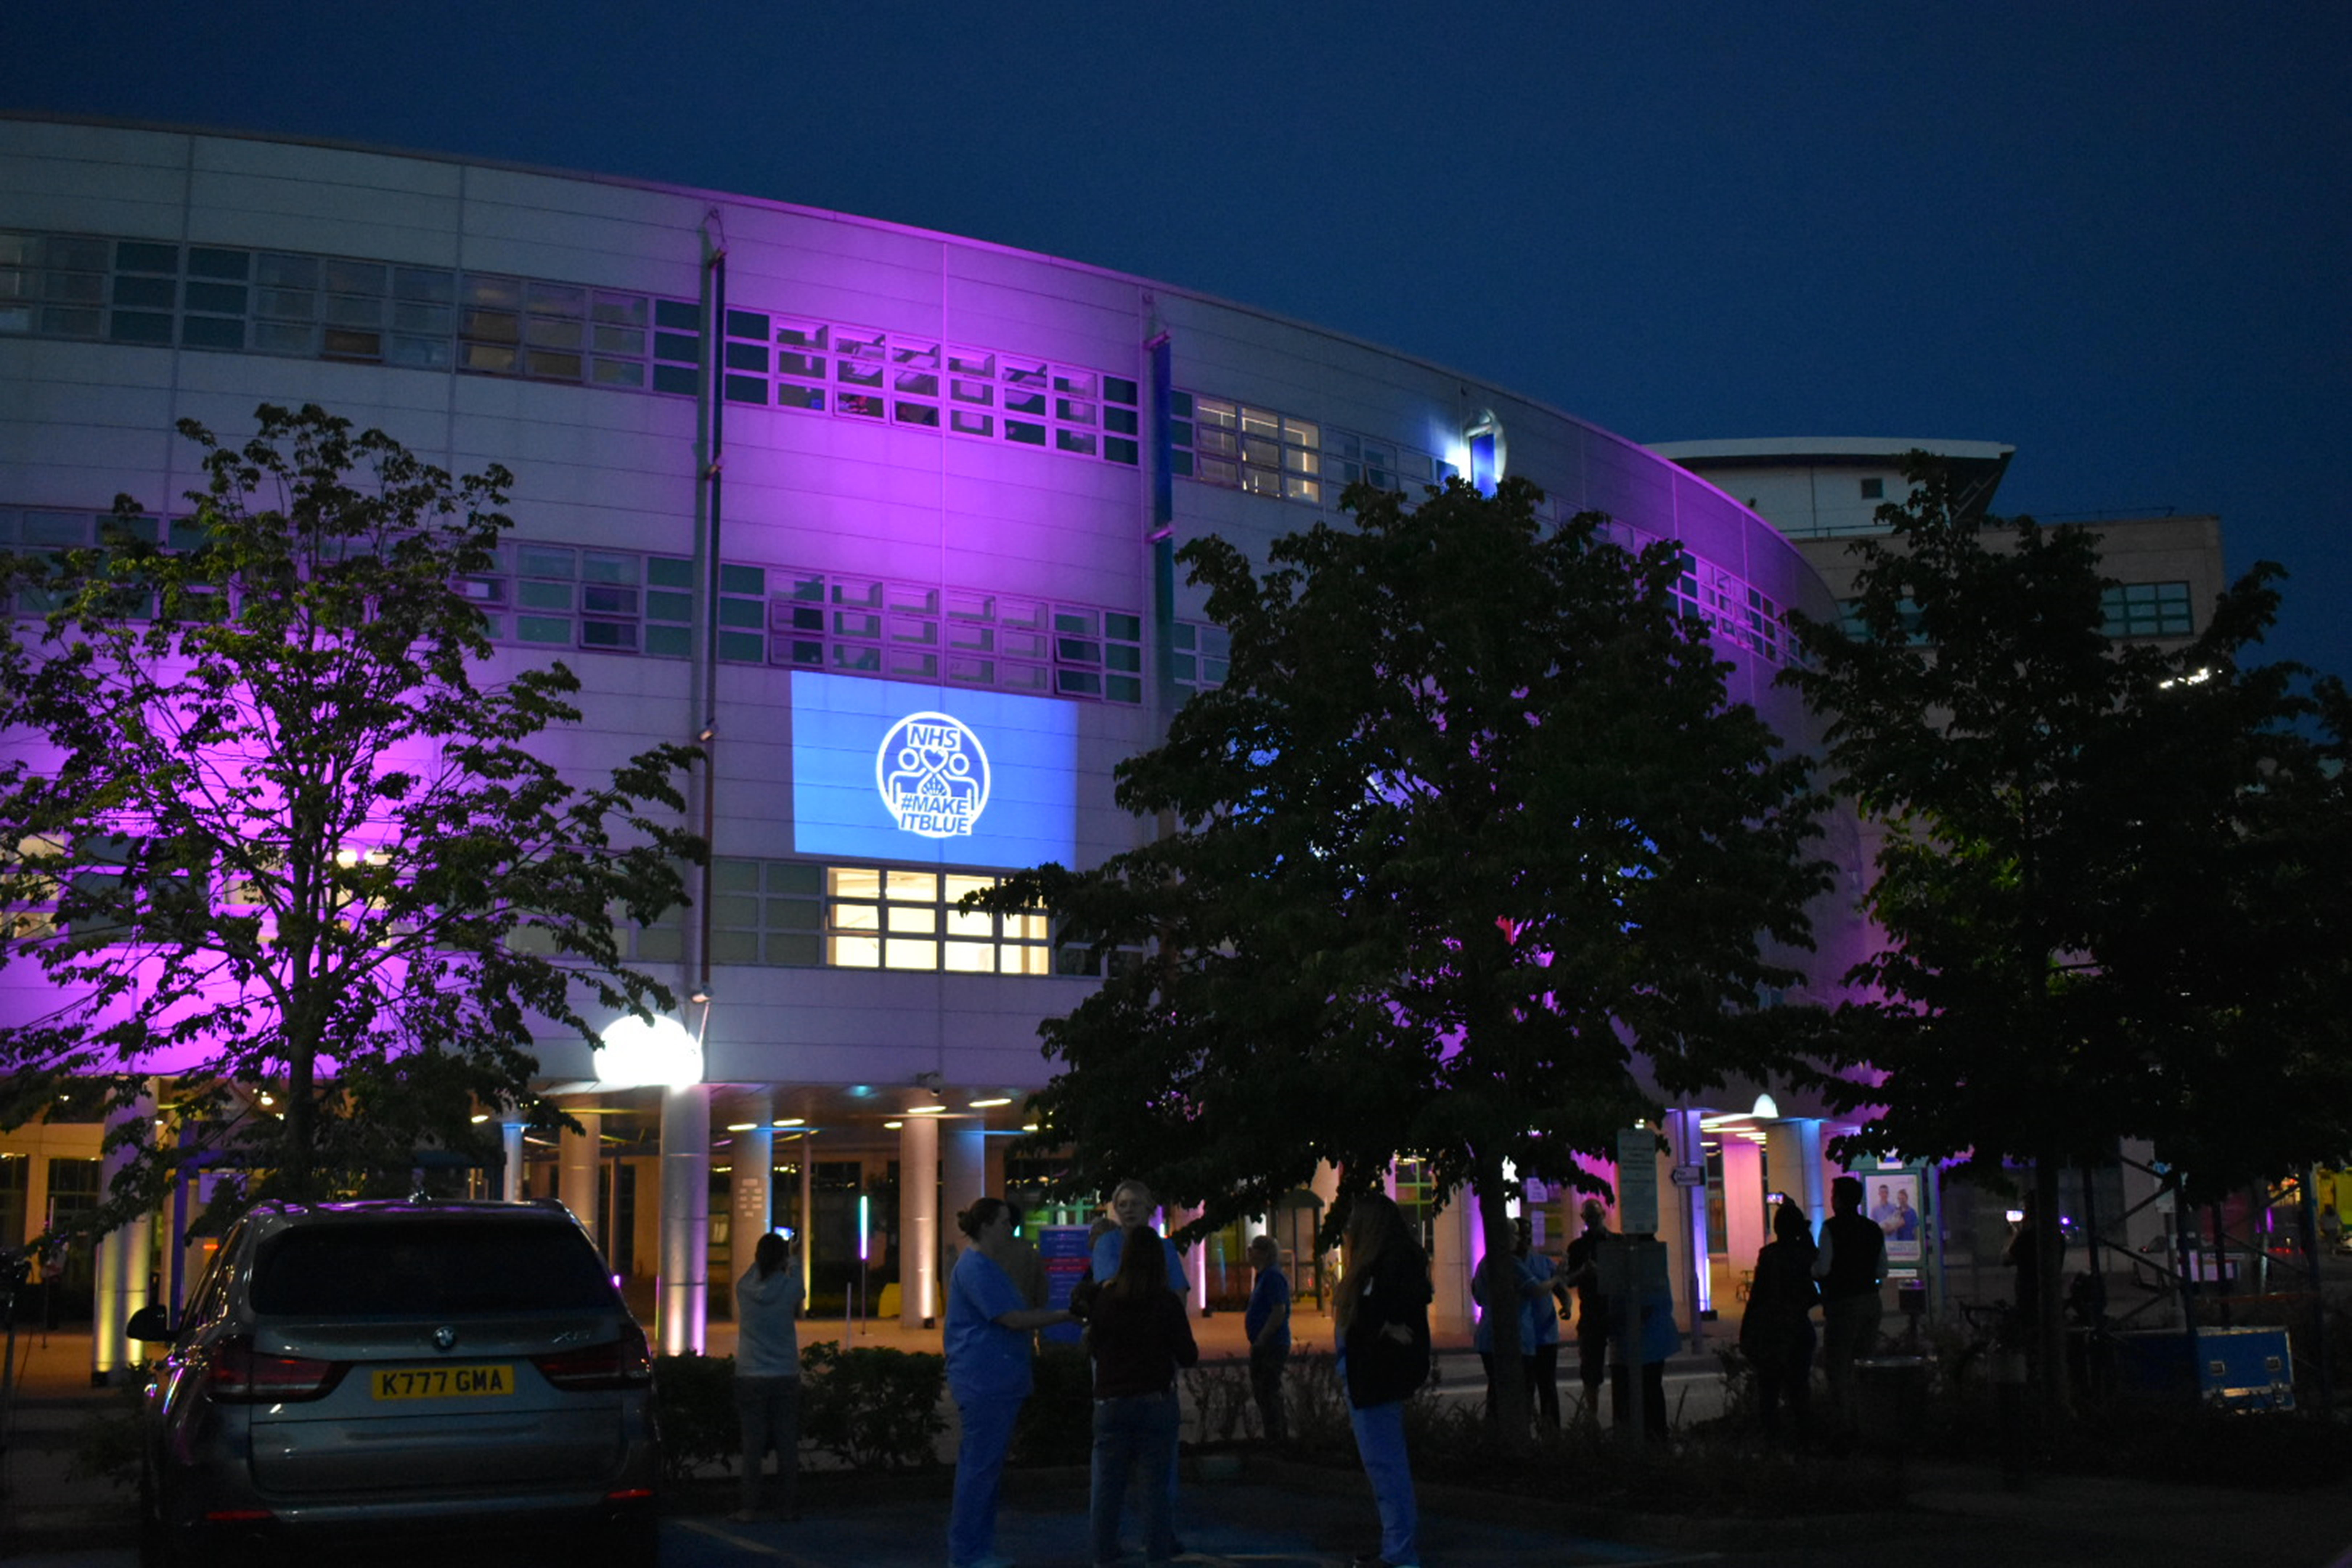 Snapped: Final Clap for Carers lights up Swindon's Great Western Hospital